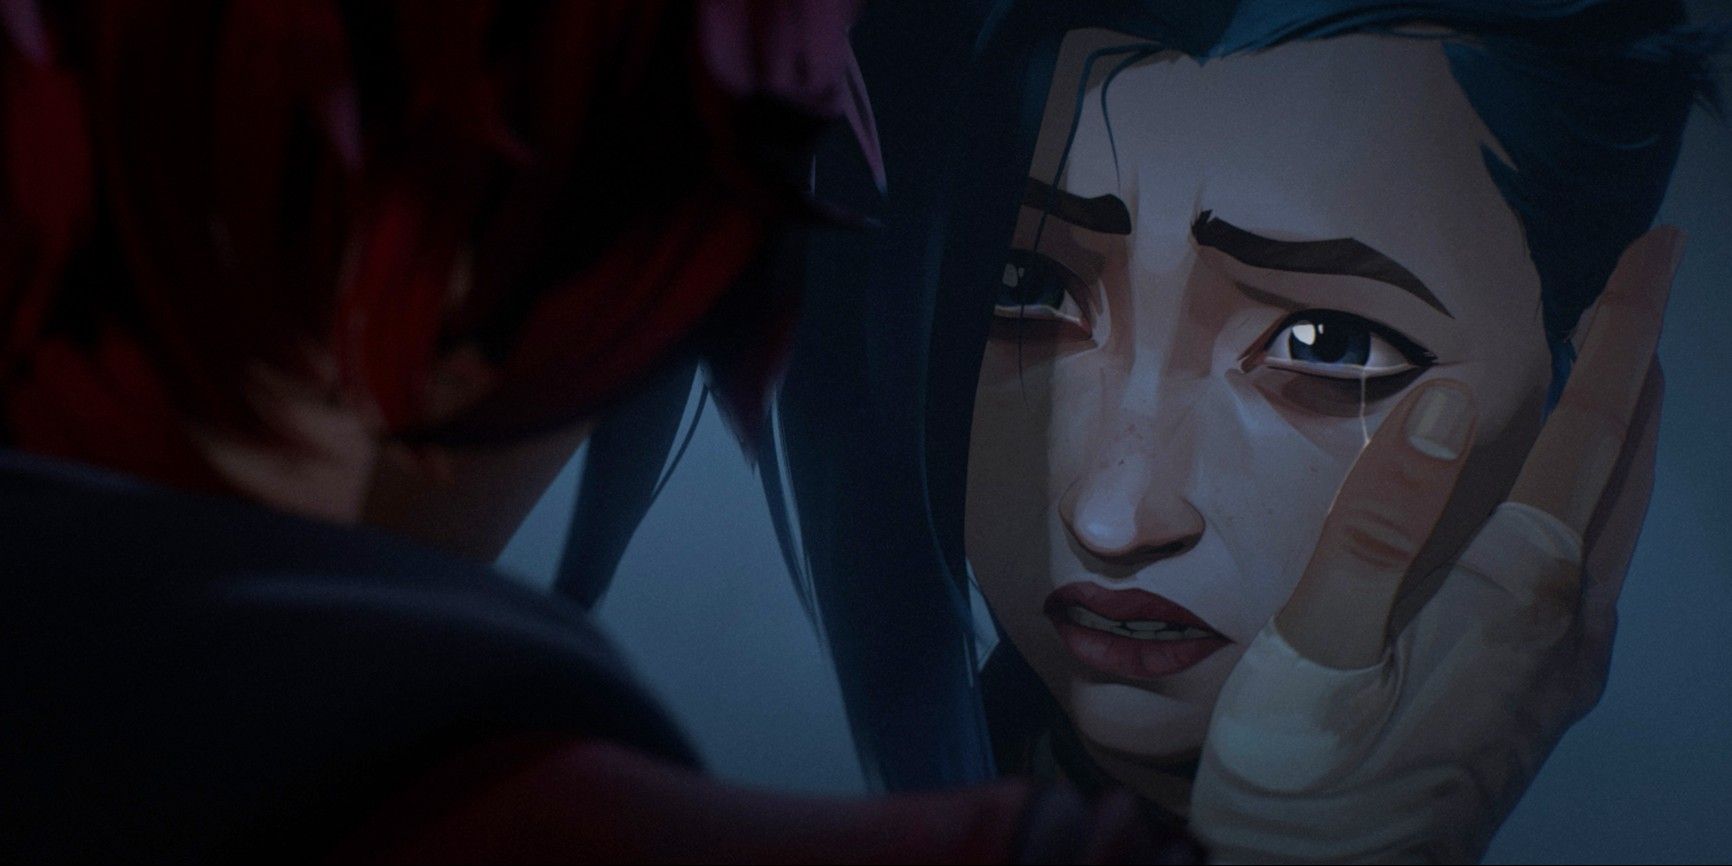 Am I the only one who wants Jinx to get a happy ending still